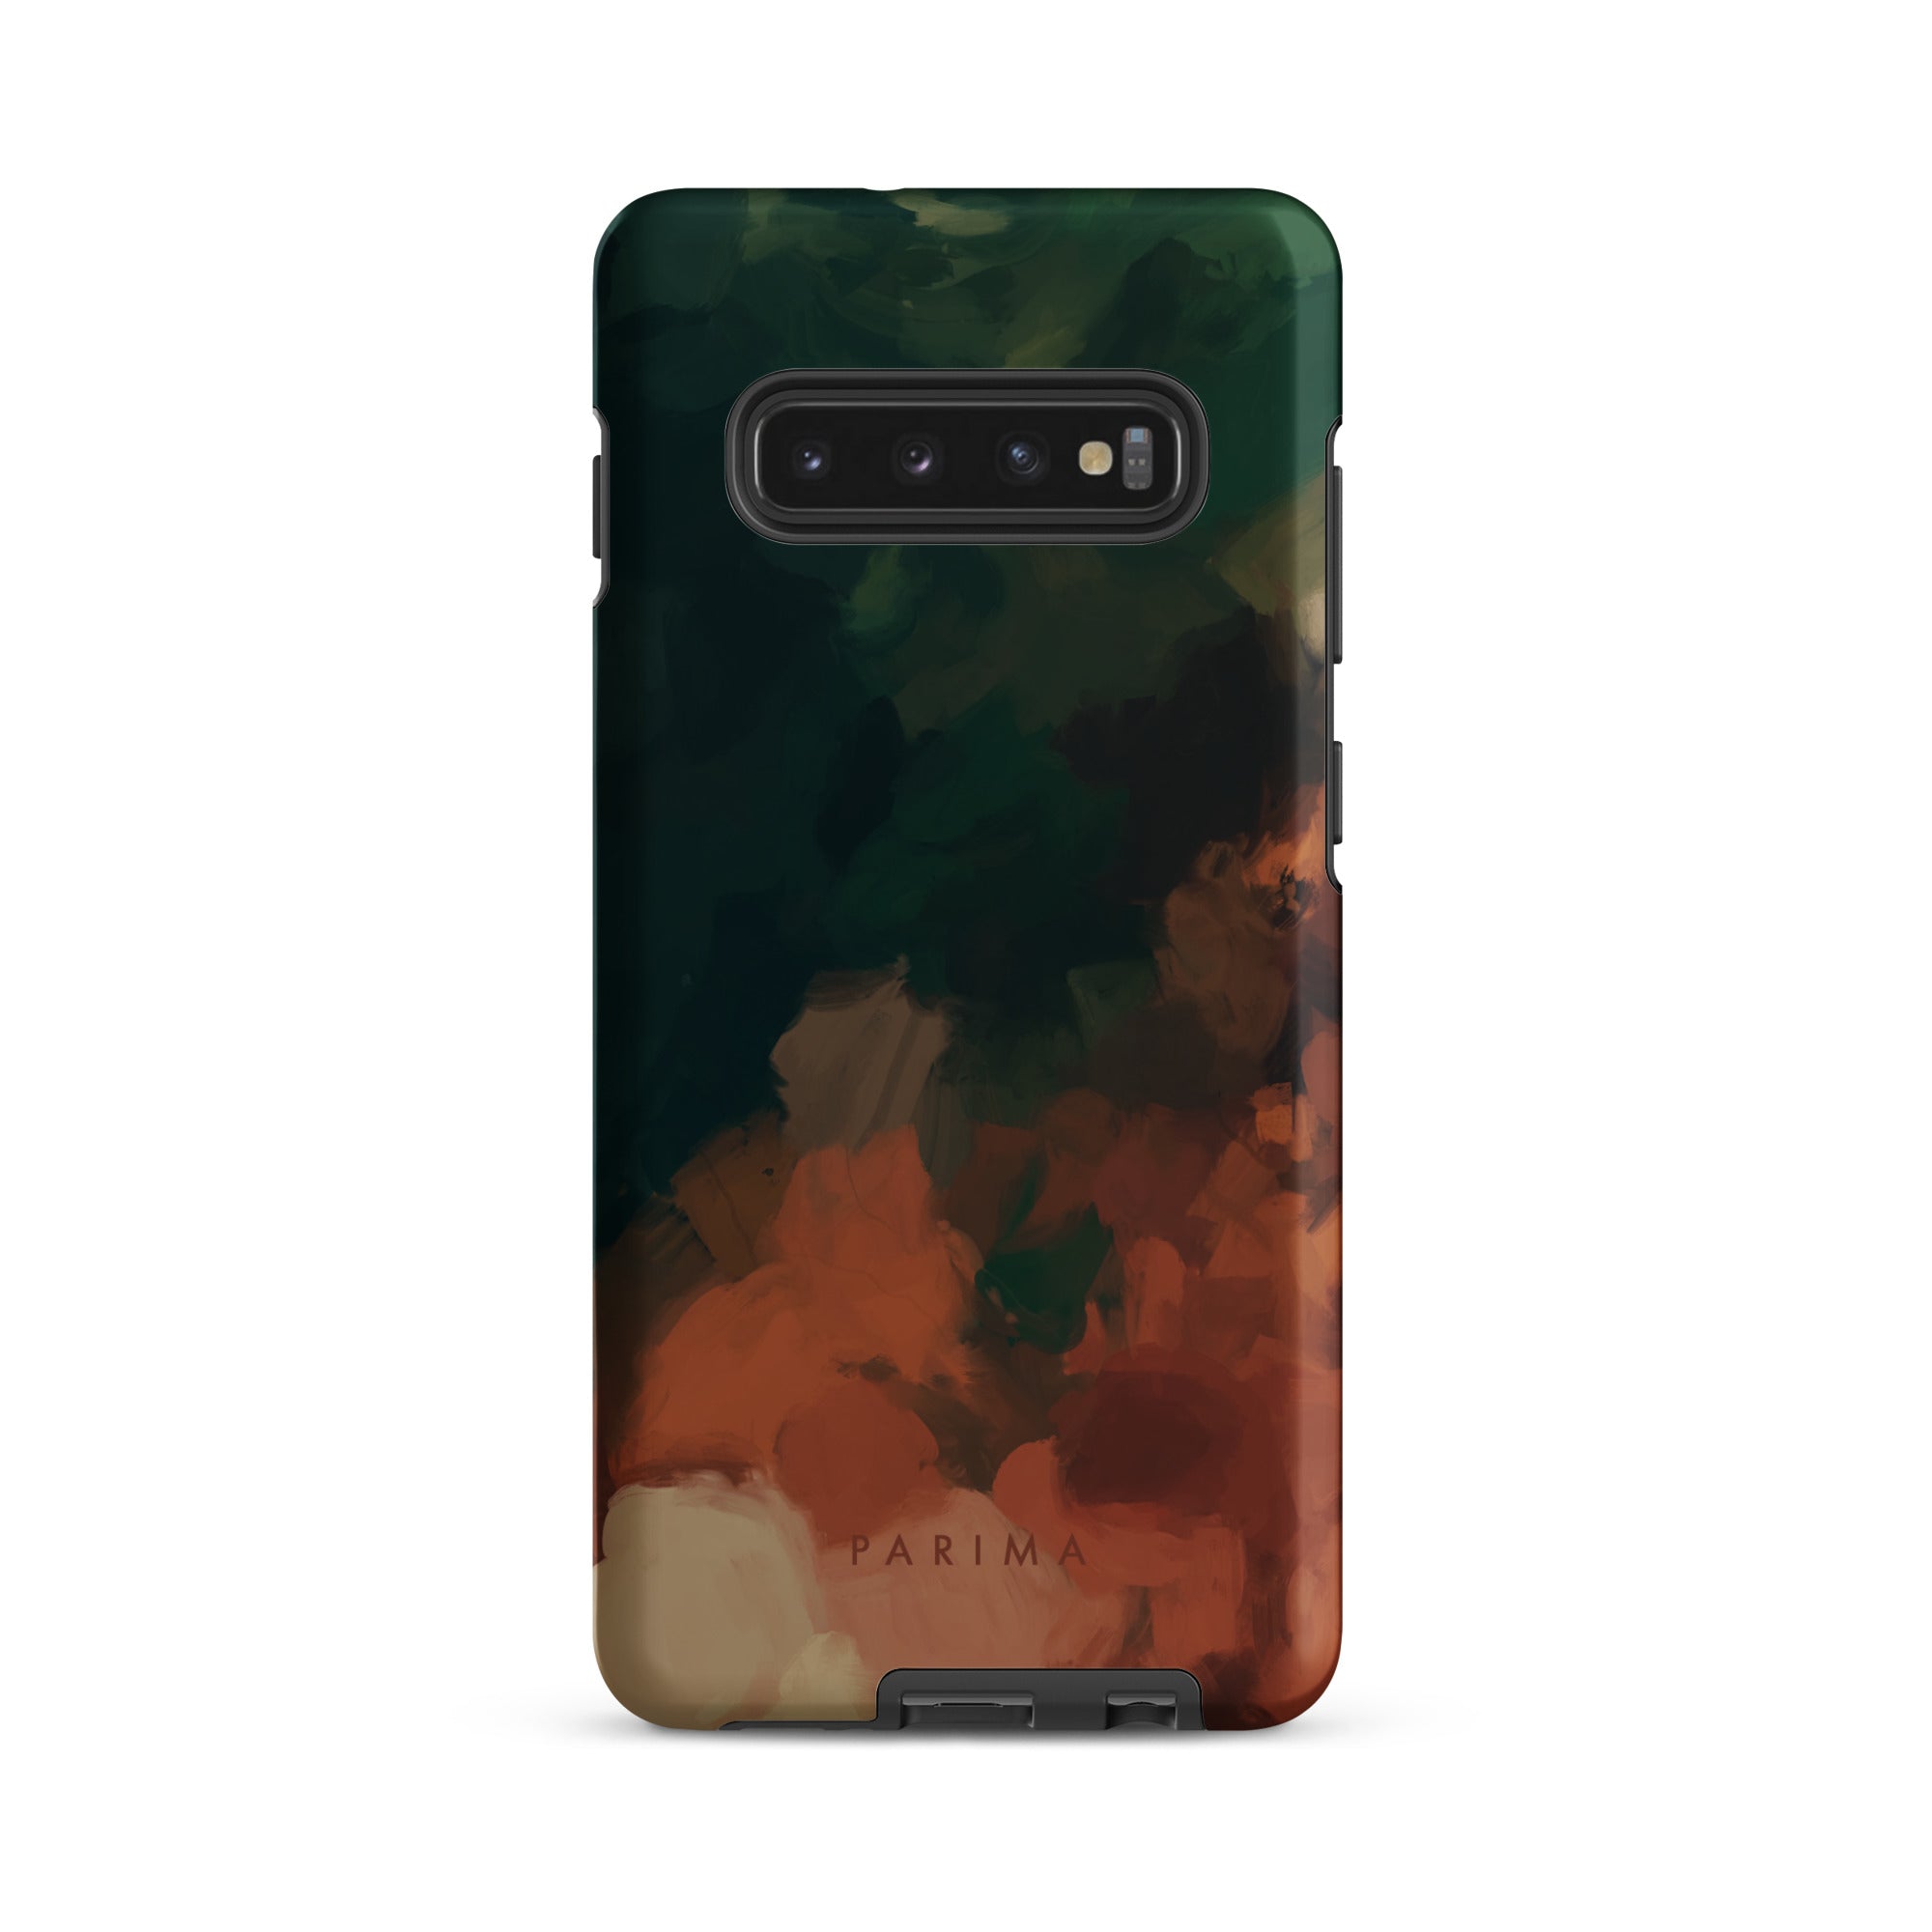 Cedar, green and brown abstract art on Samsung Galaxy S10 Plus tough case by Parima Studio